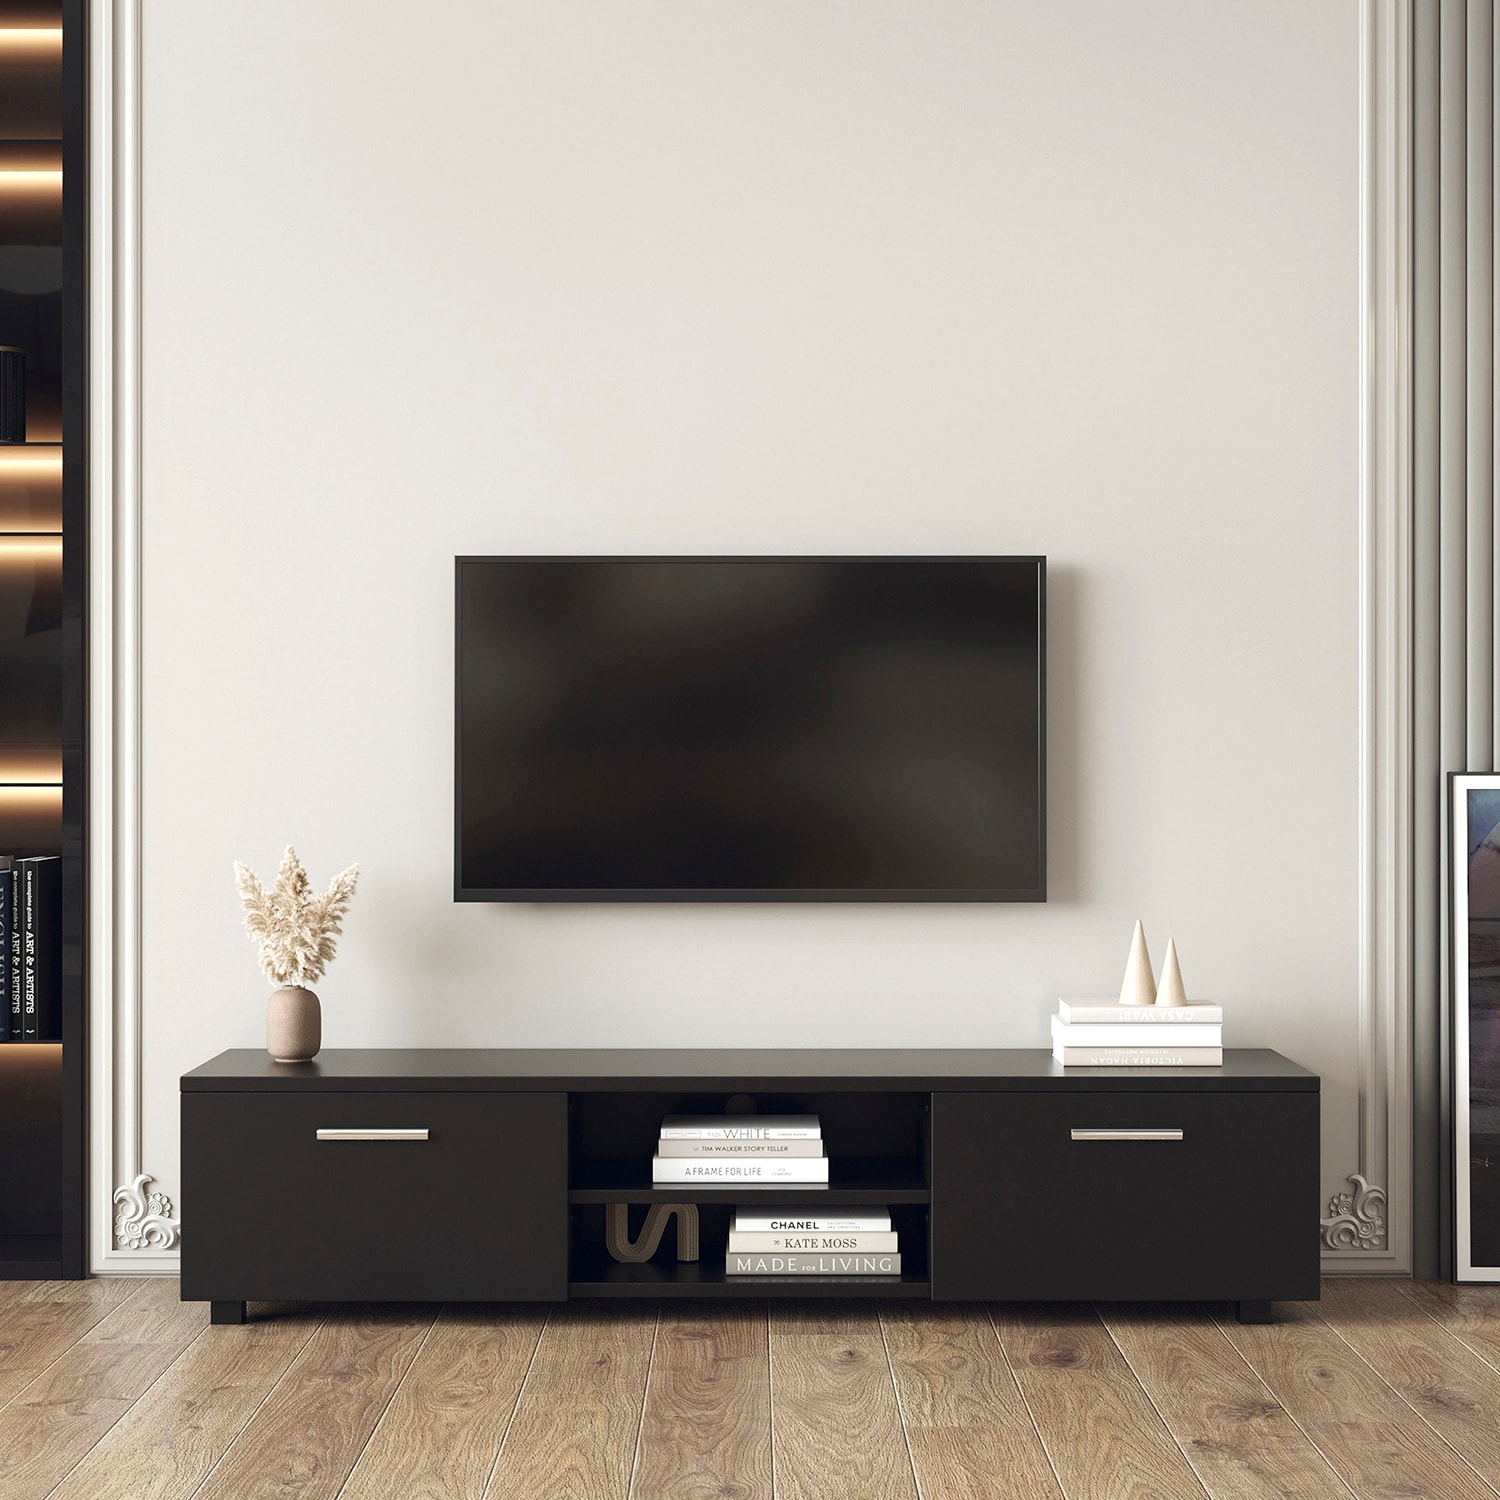 GZMR Black TV Stand for 70-in TV Stands Modern/Contemporary Black TV Cabinet